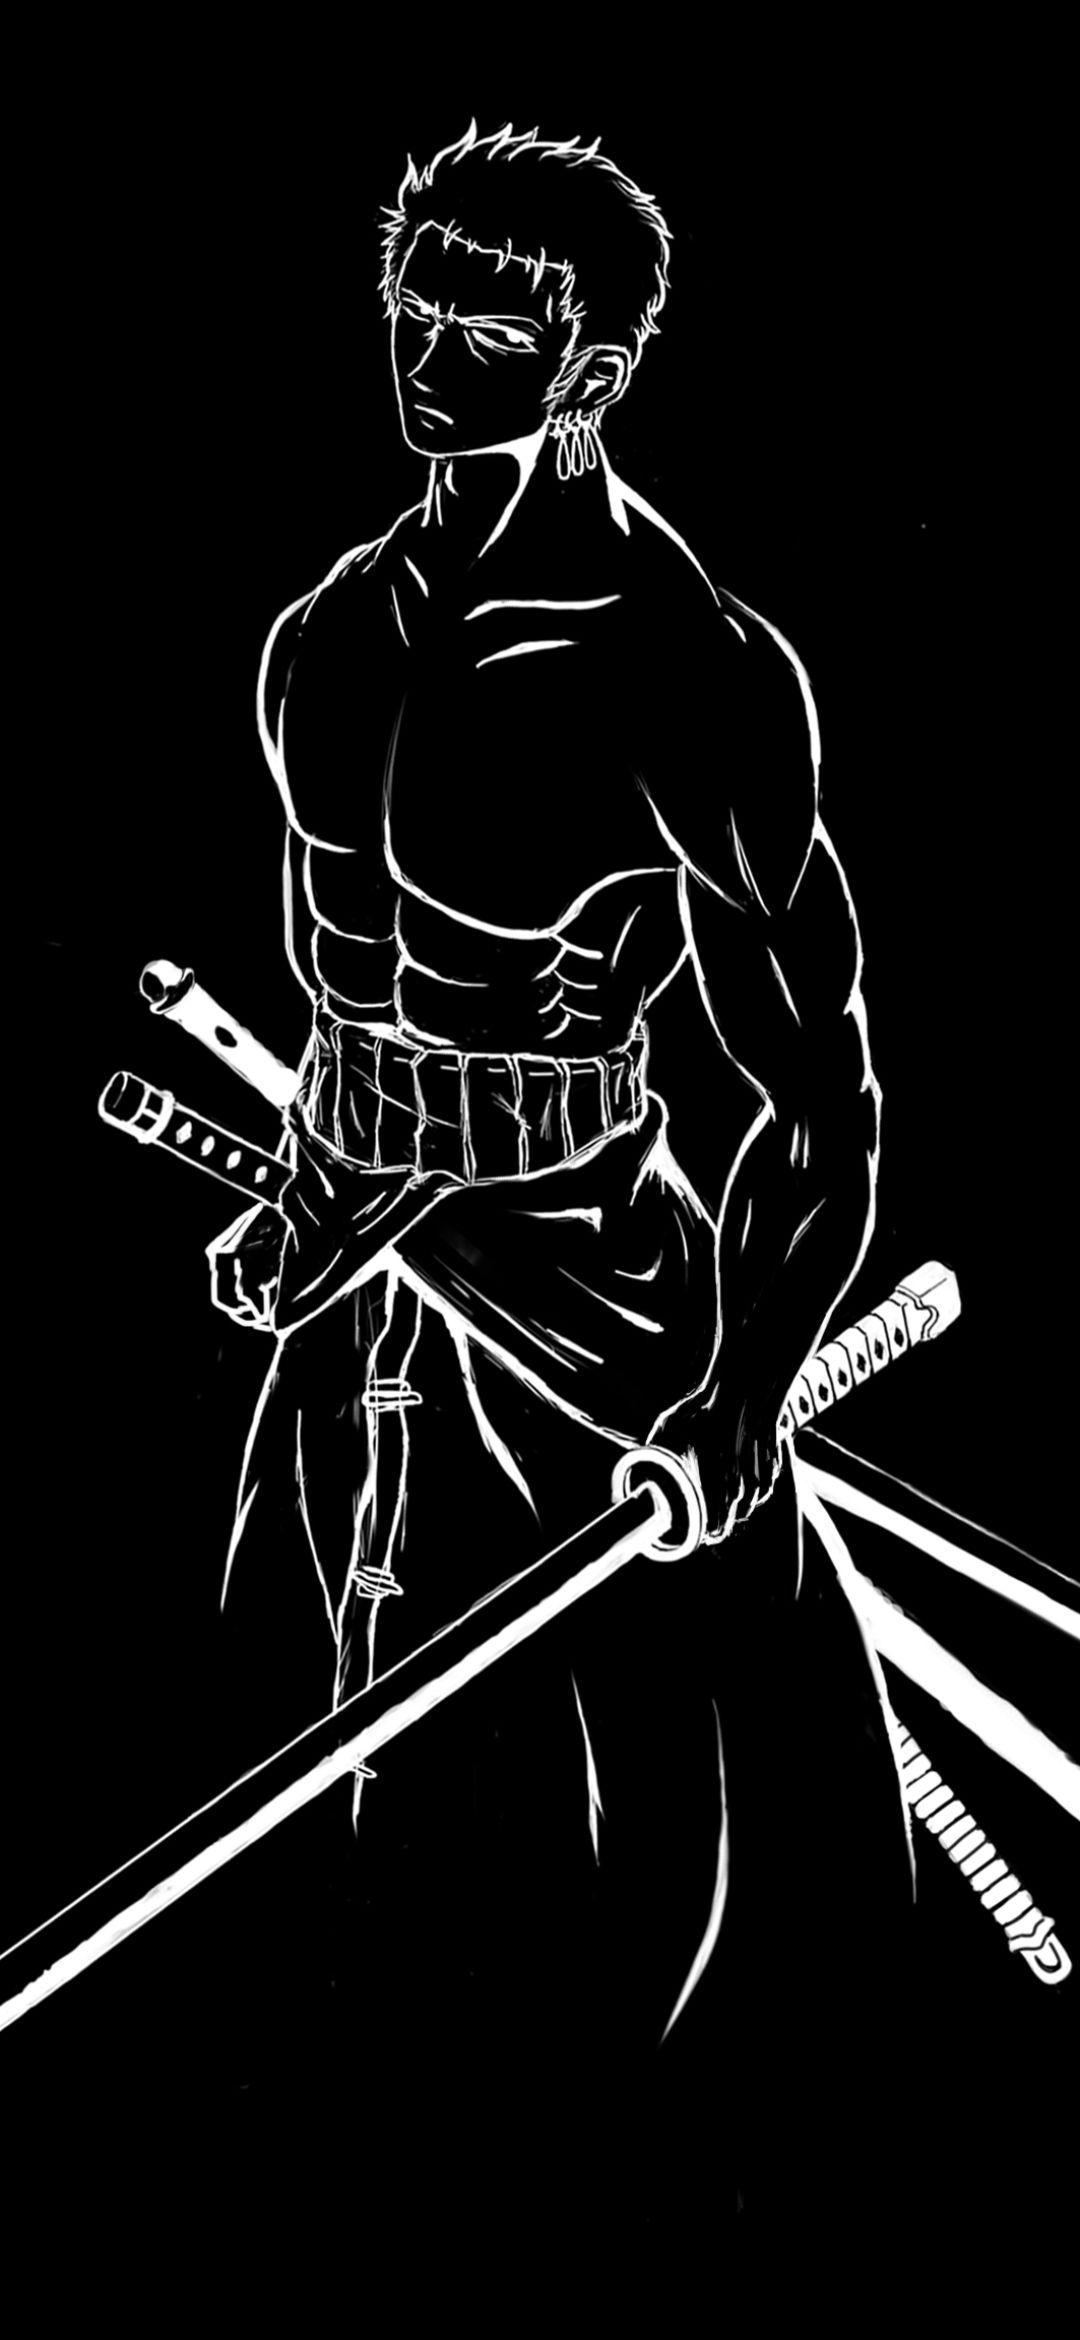 One Piece Zoro Mobile Wallpapers - Top Free One Piece Zoro Mobile ...